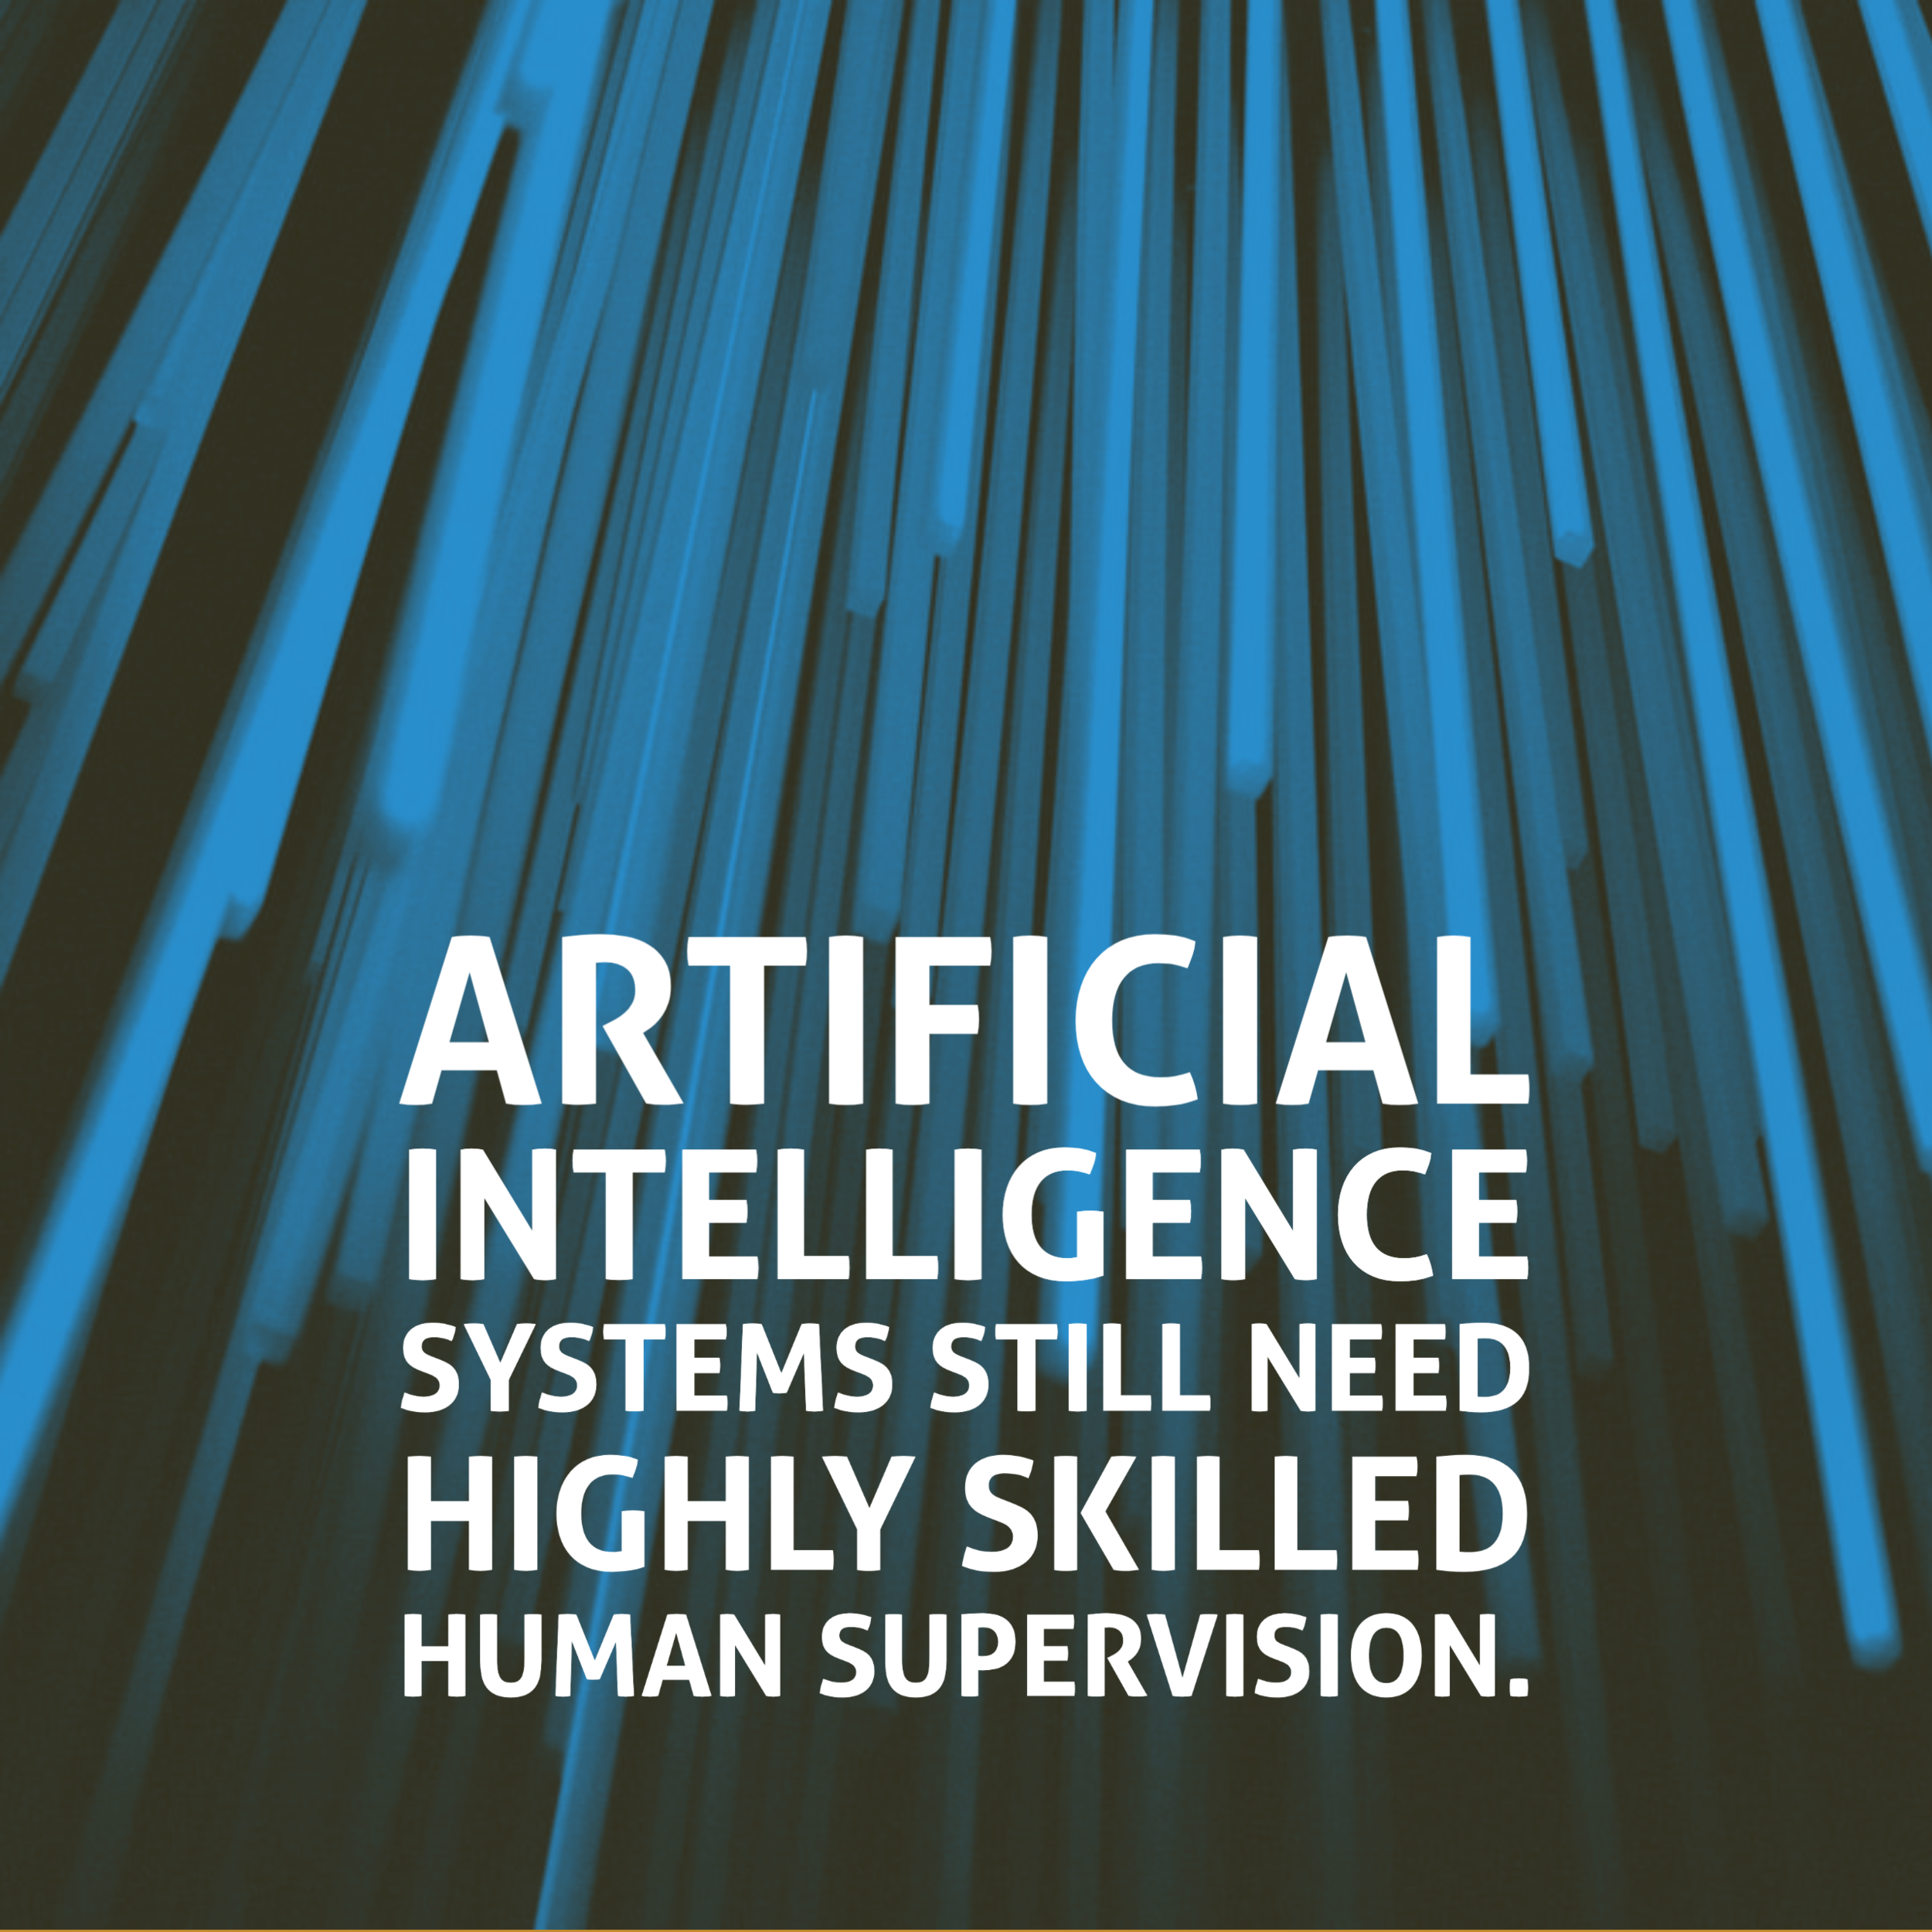 Artificial intelligence systems still need highly skilled human supervision.